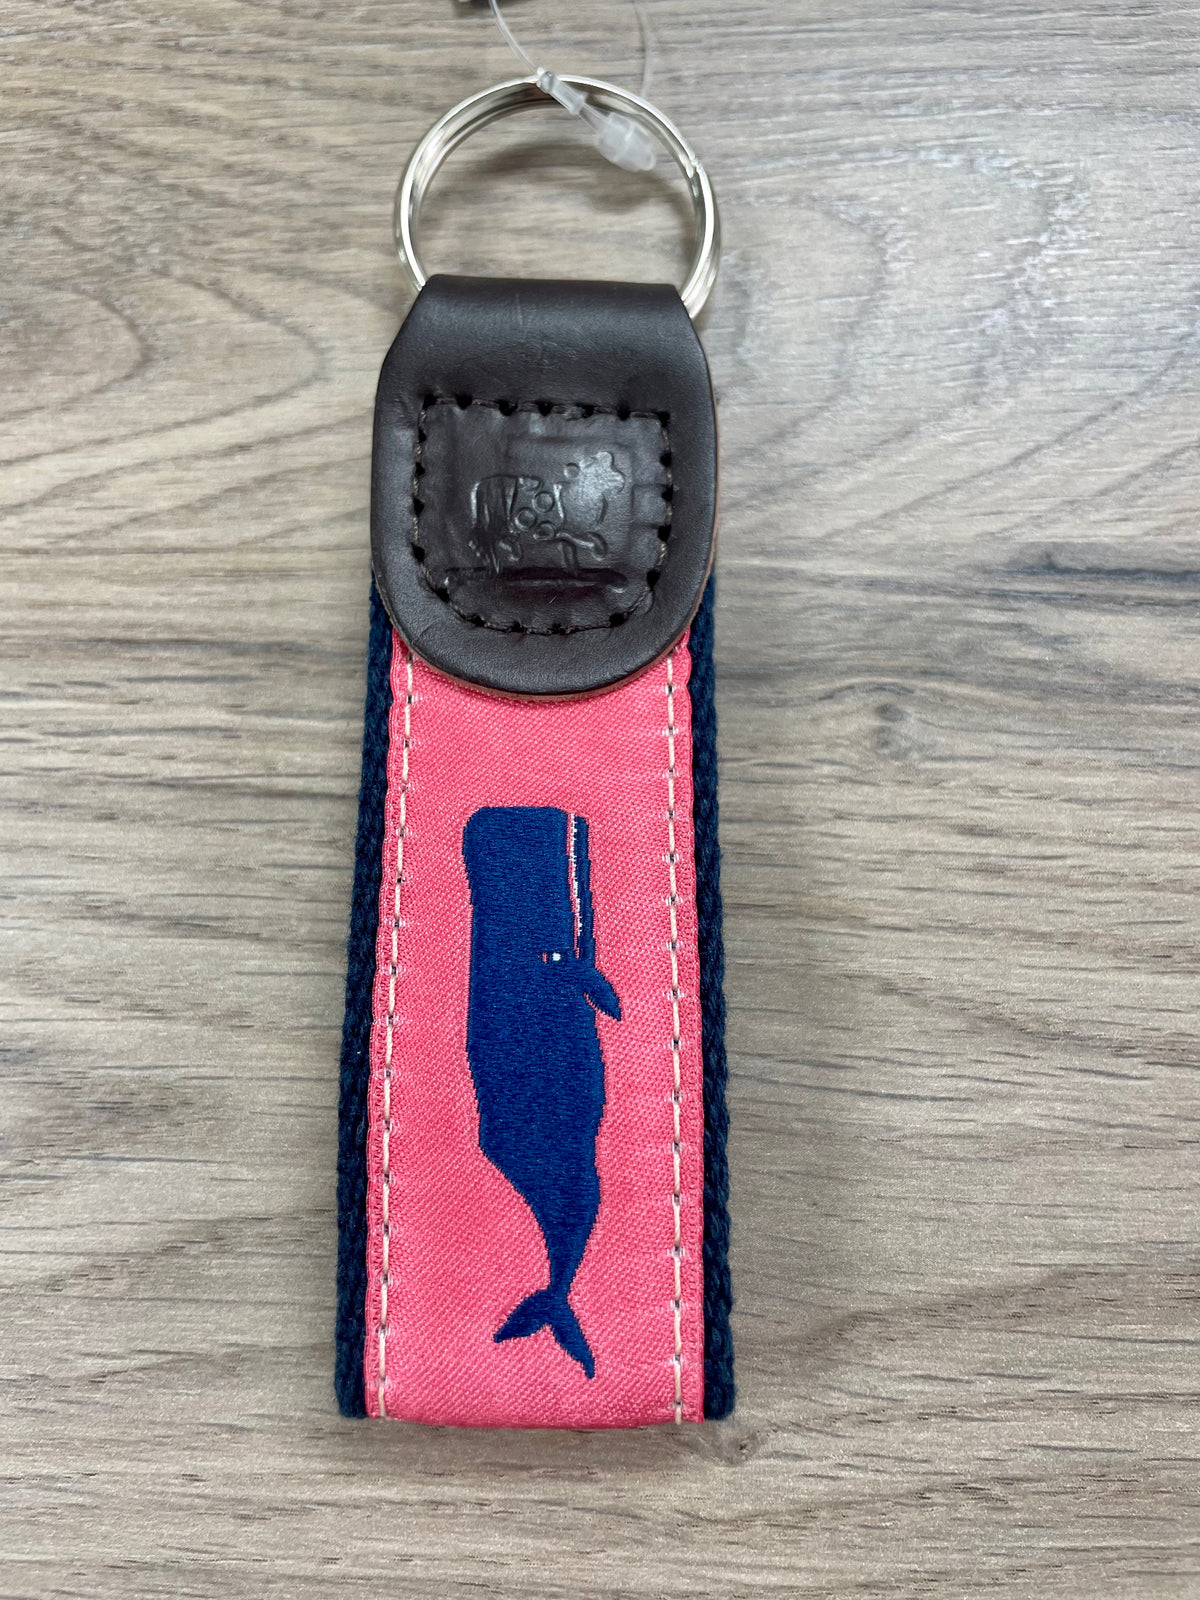 Belted Cow Key Fobs